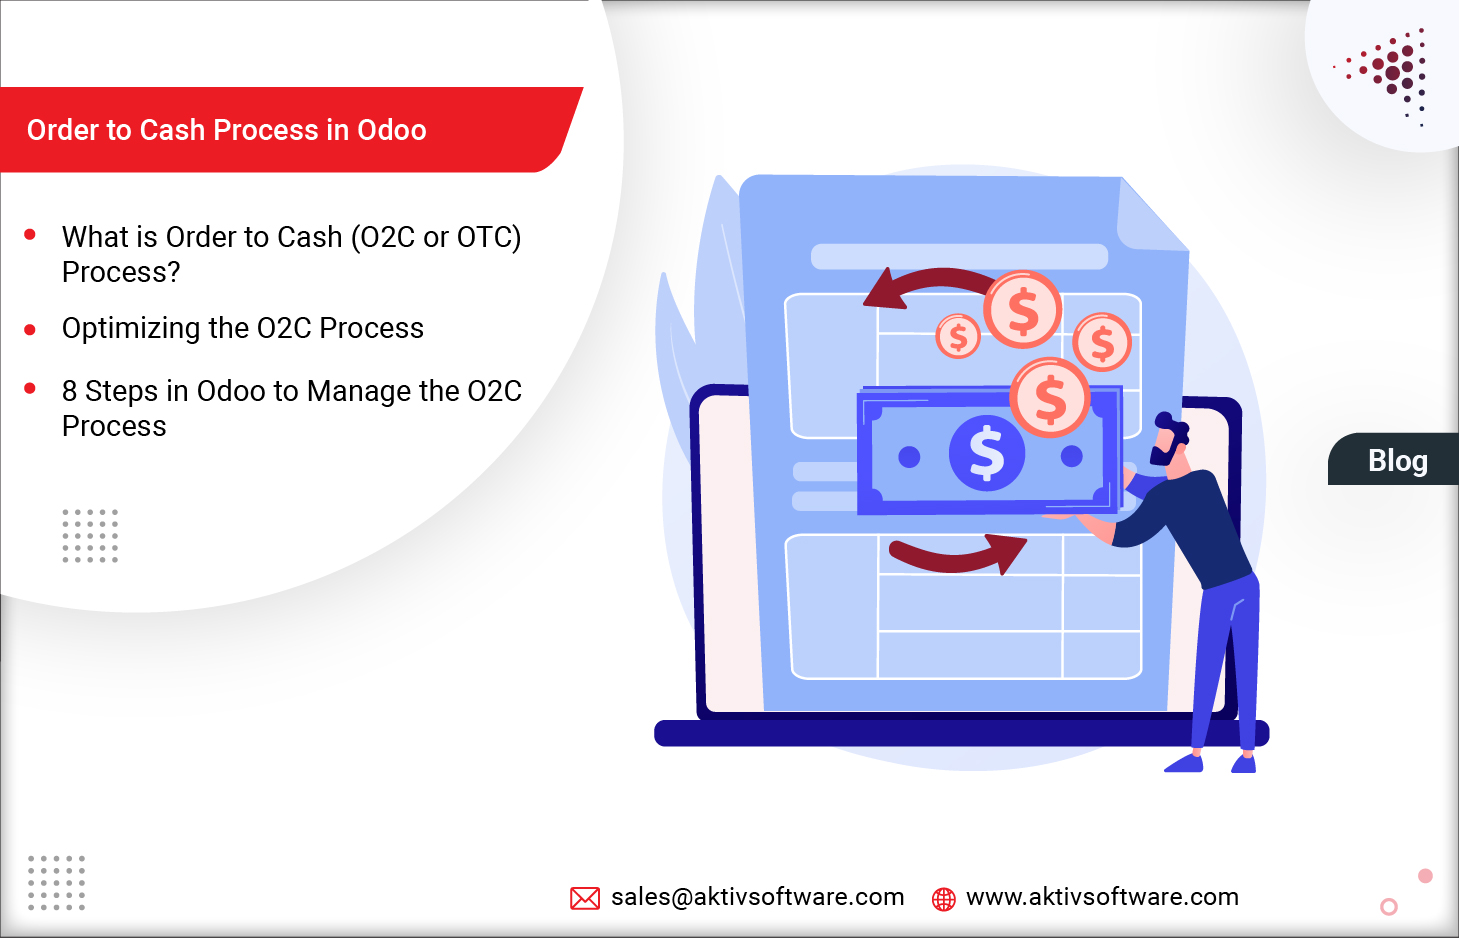 Order to Cash Process in Odoo